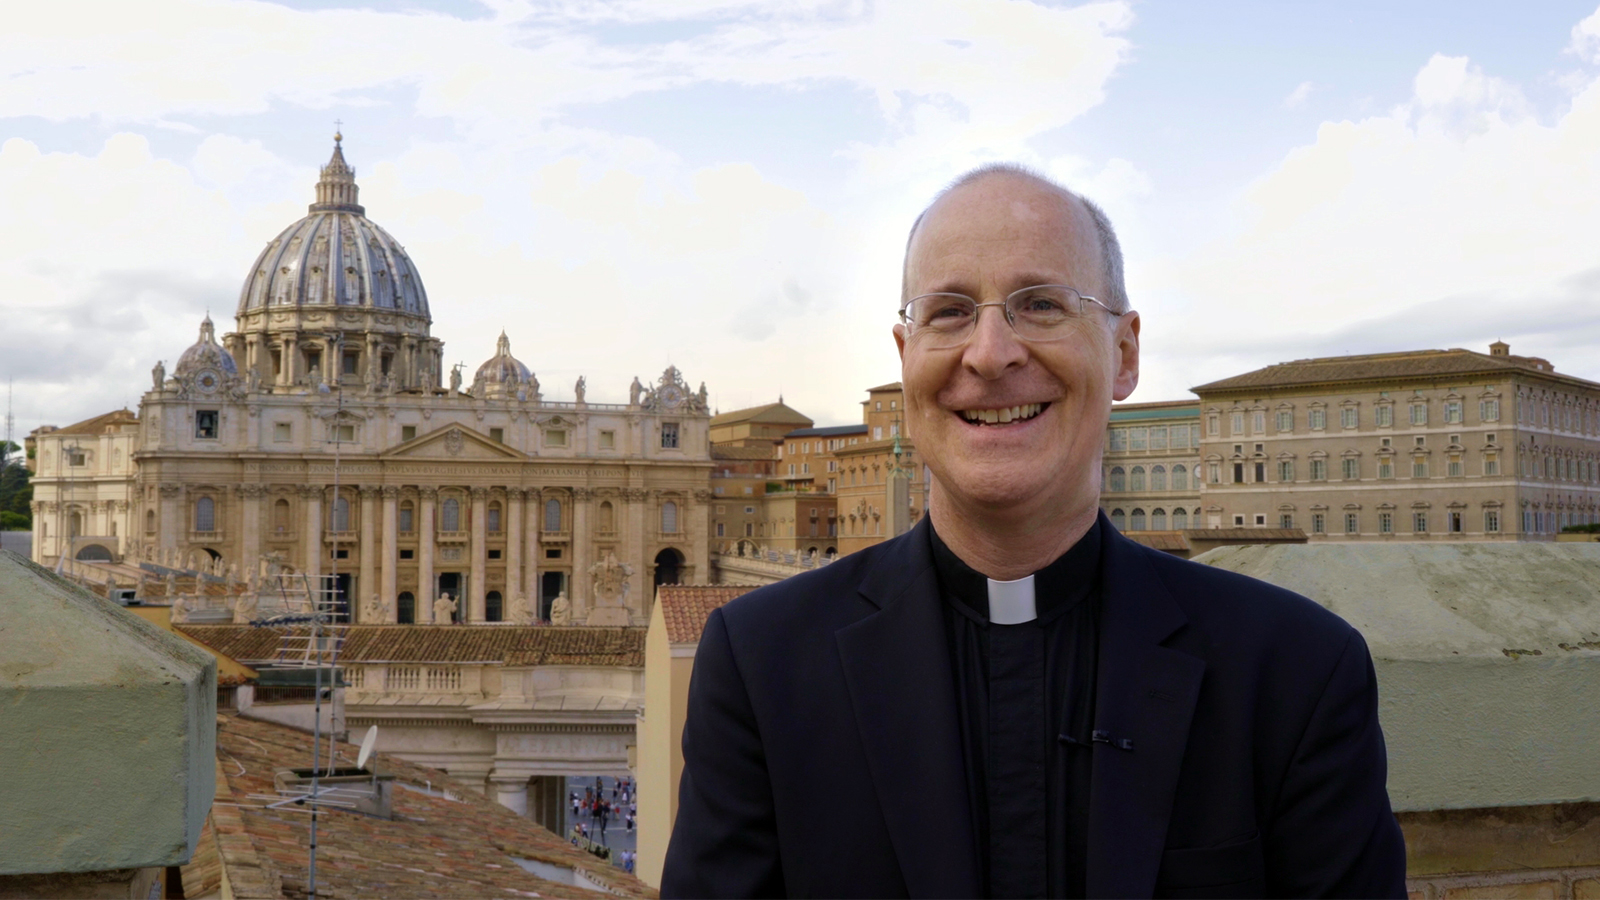 The Rev. James Martin at the Vatican in a scene from the documentary "Building a Bridge." Photo courtesy of Building a Bridge